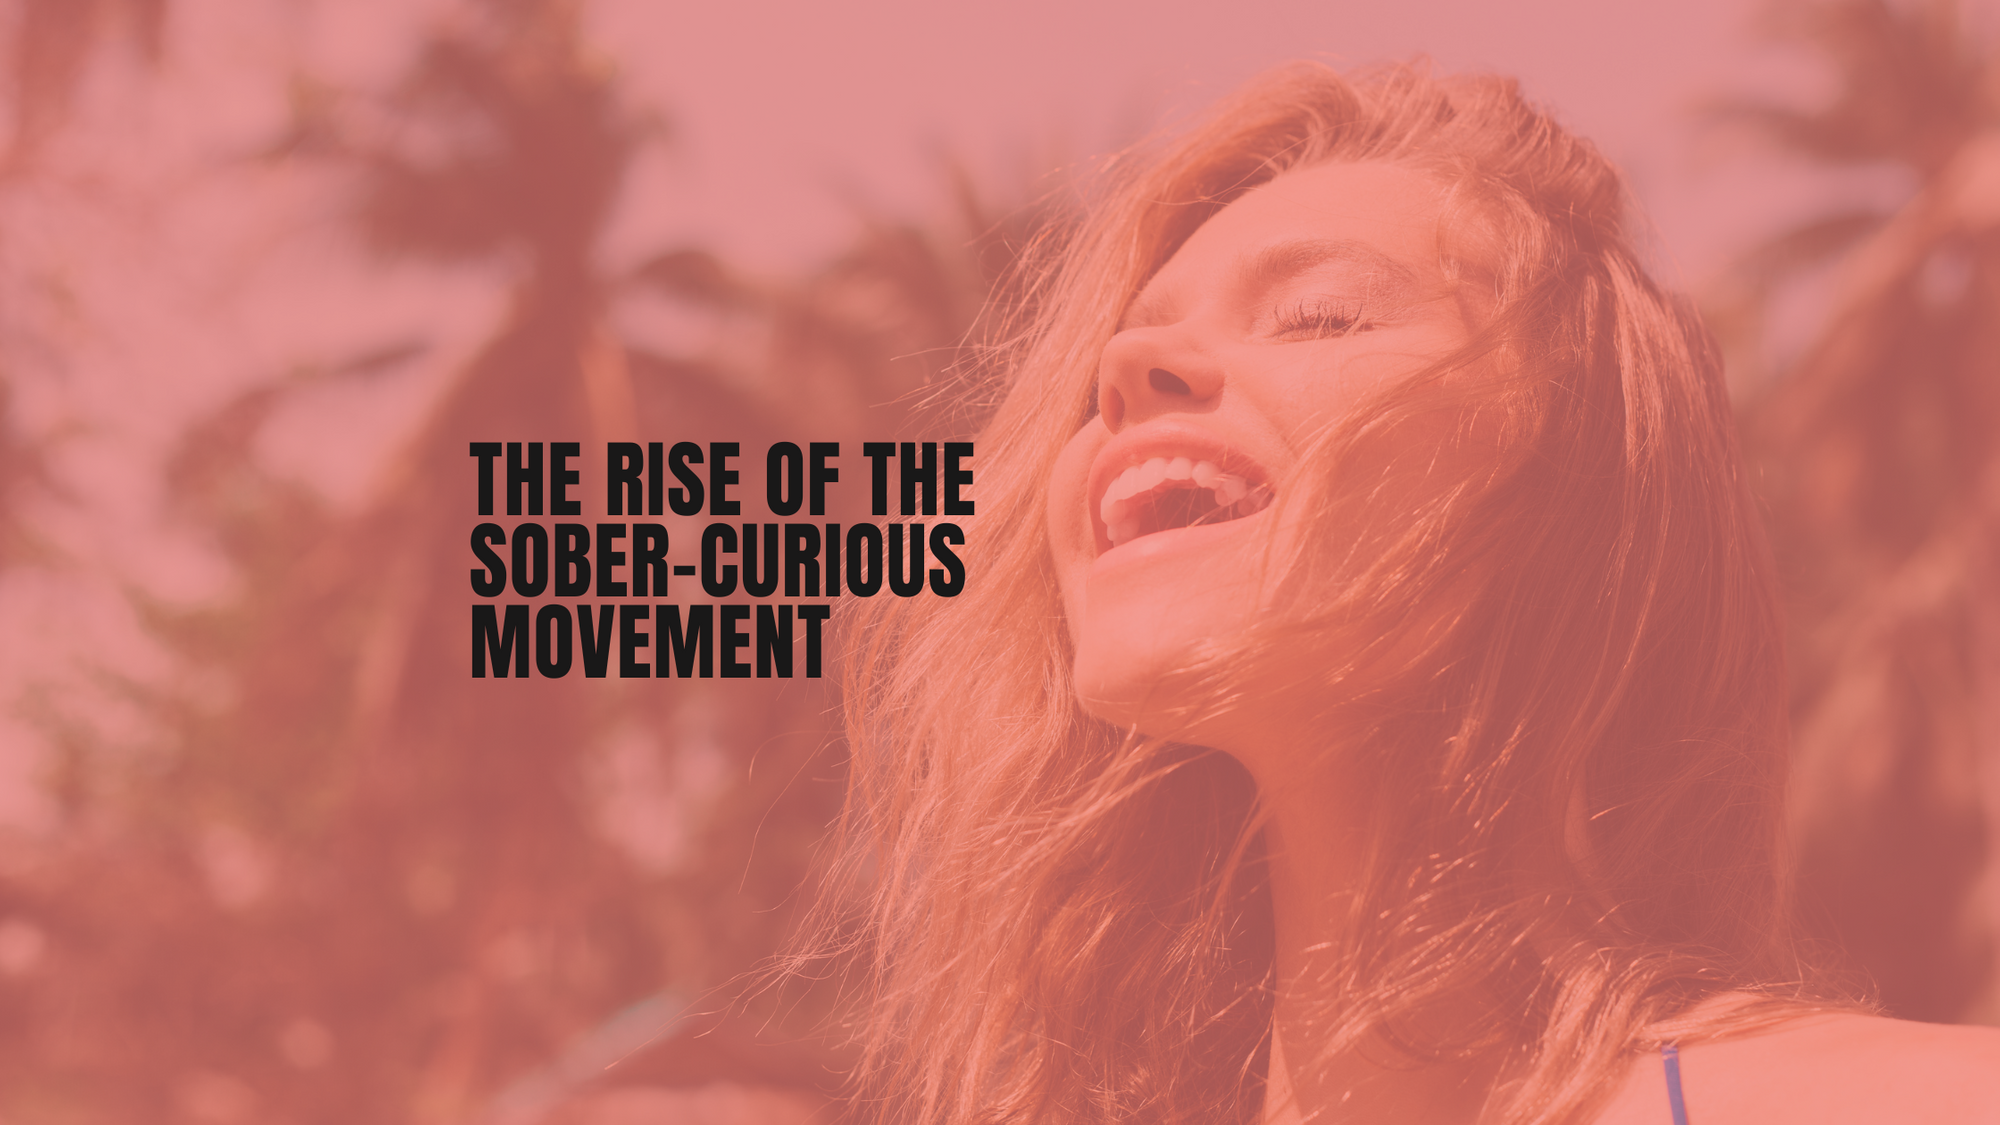 The Rise of the Sober-Curious Movement